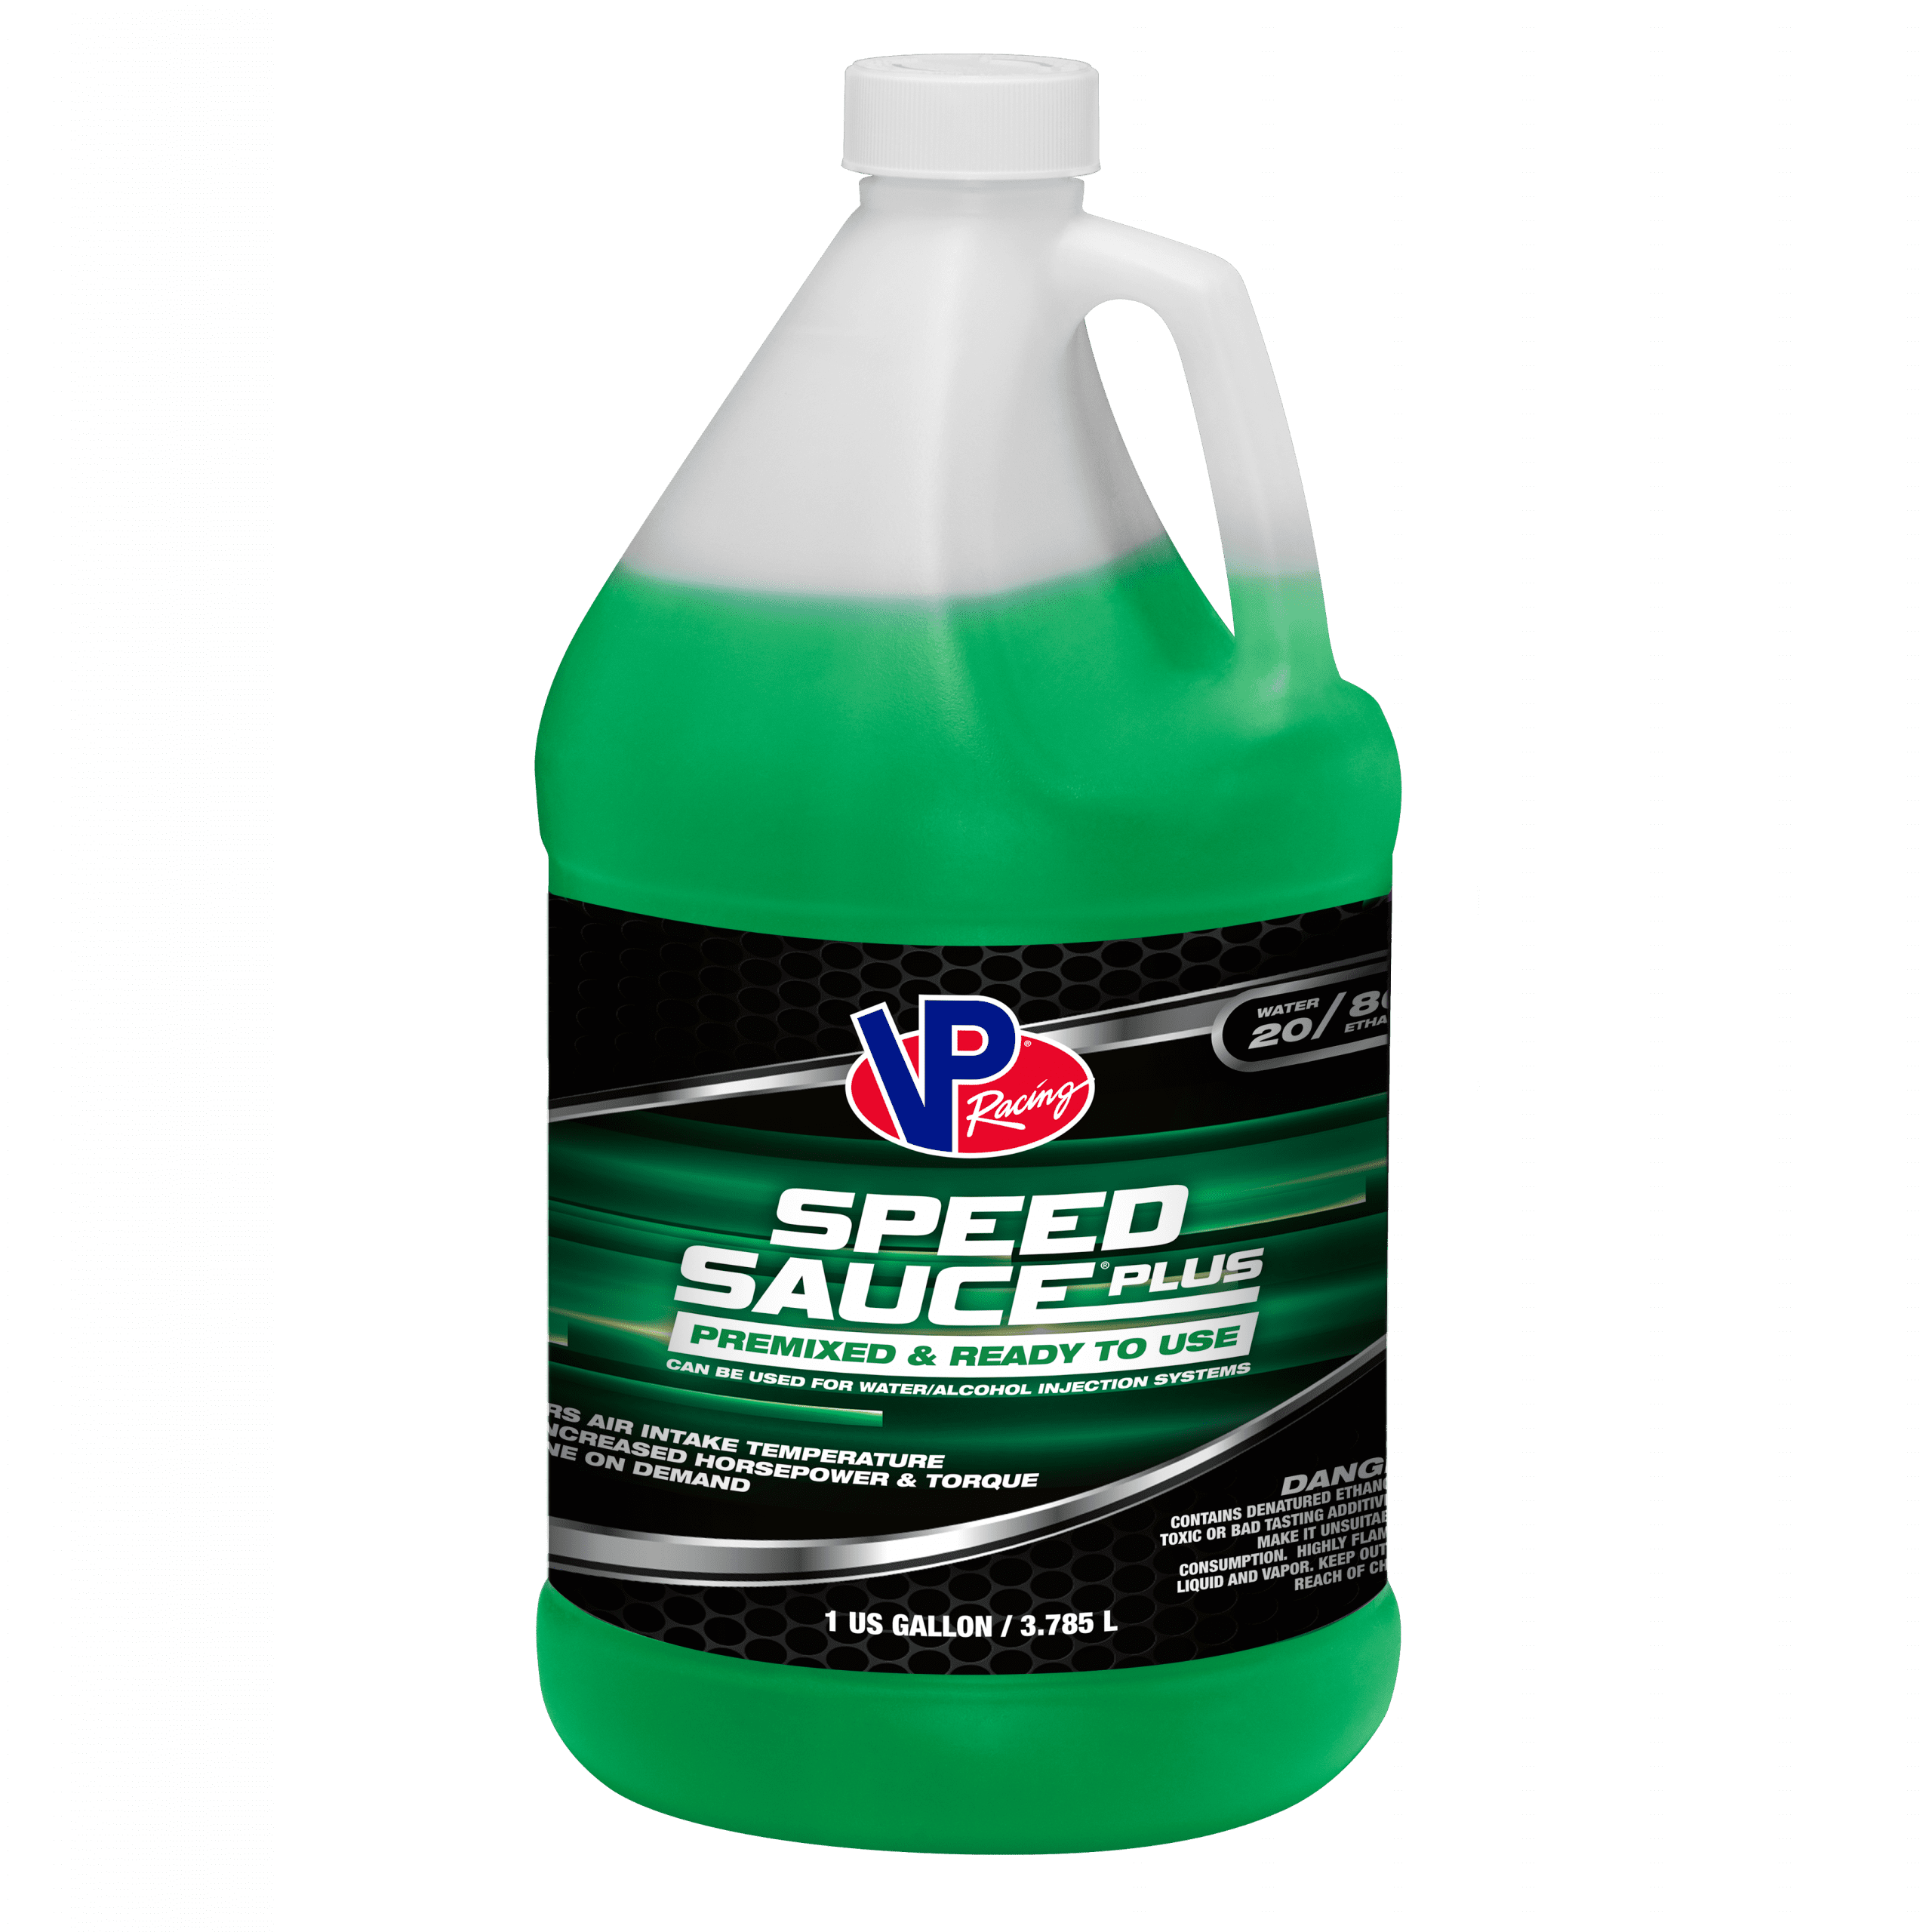 Water-Ethanol fuel injection fluid. Water-methanol fuel injection fluid. VP Racing Speed Sauce for water injection kits.